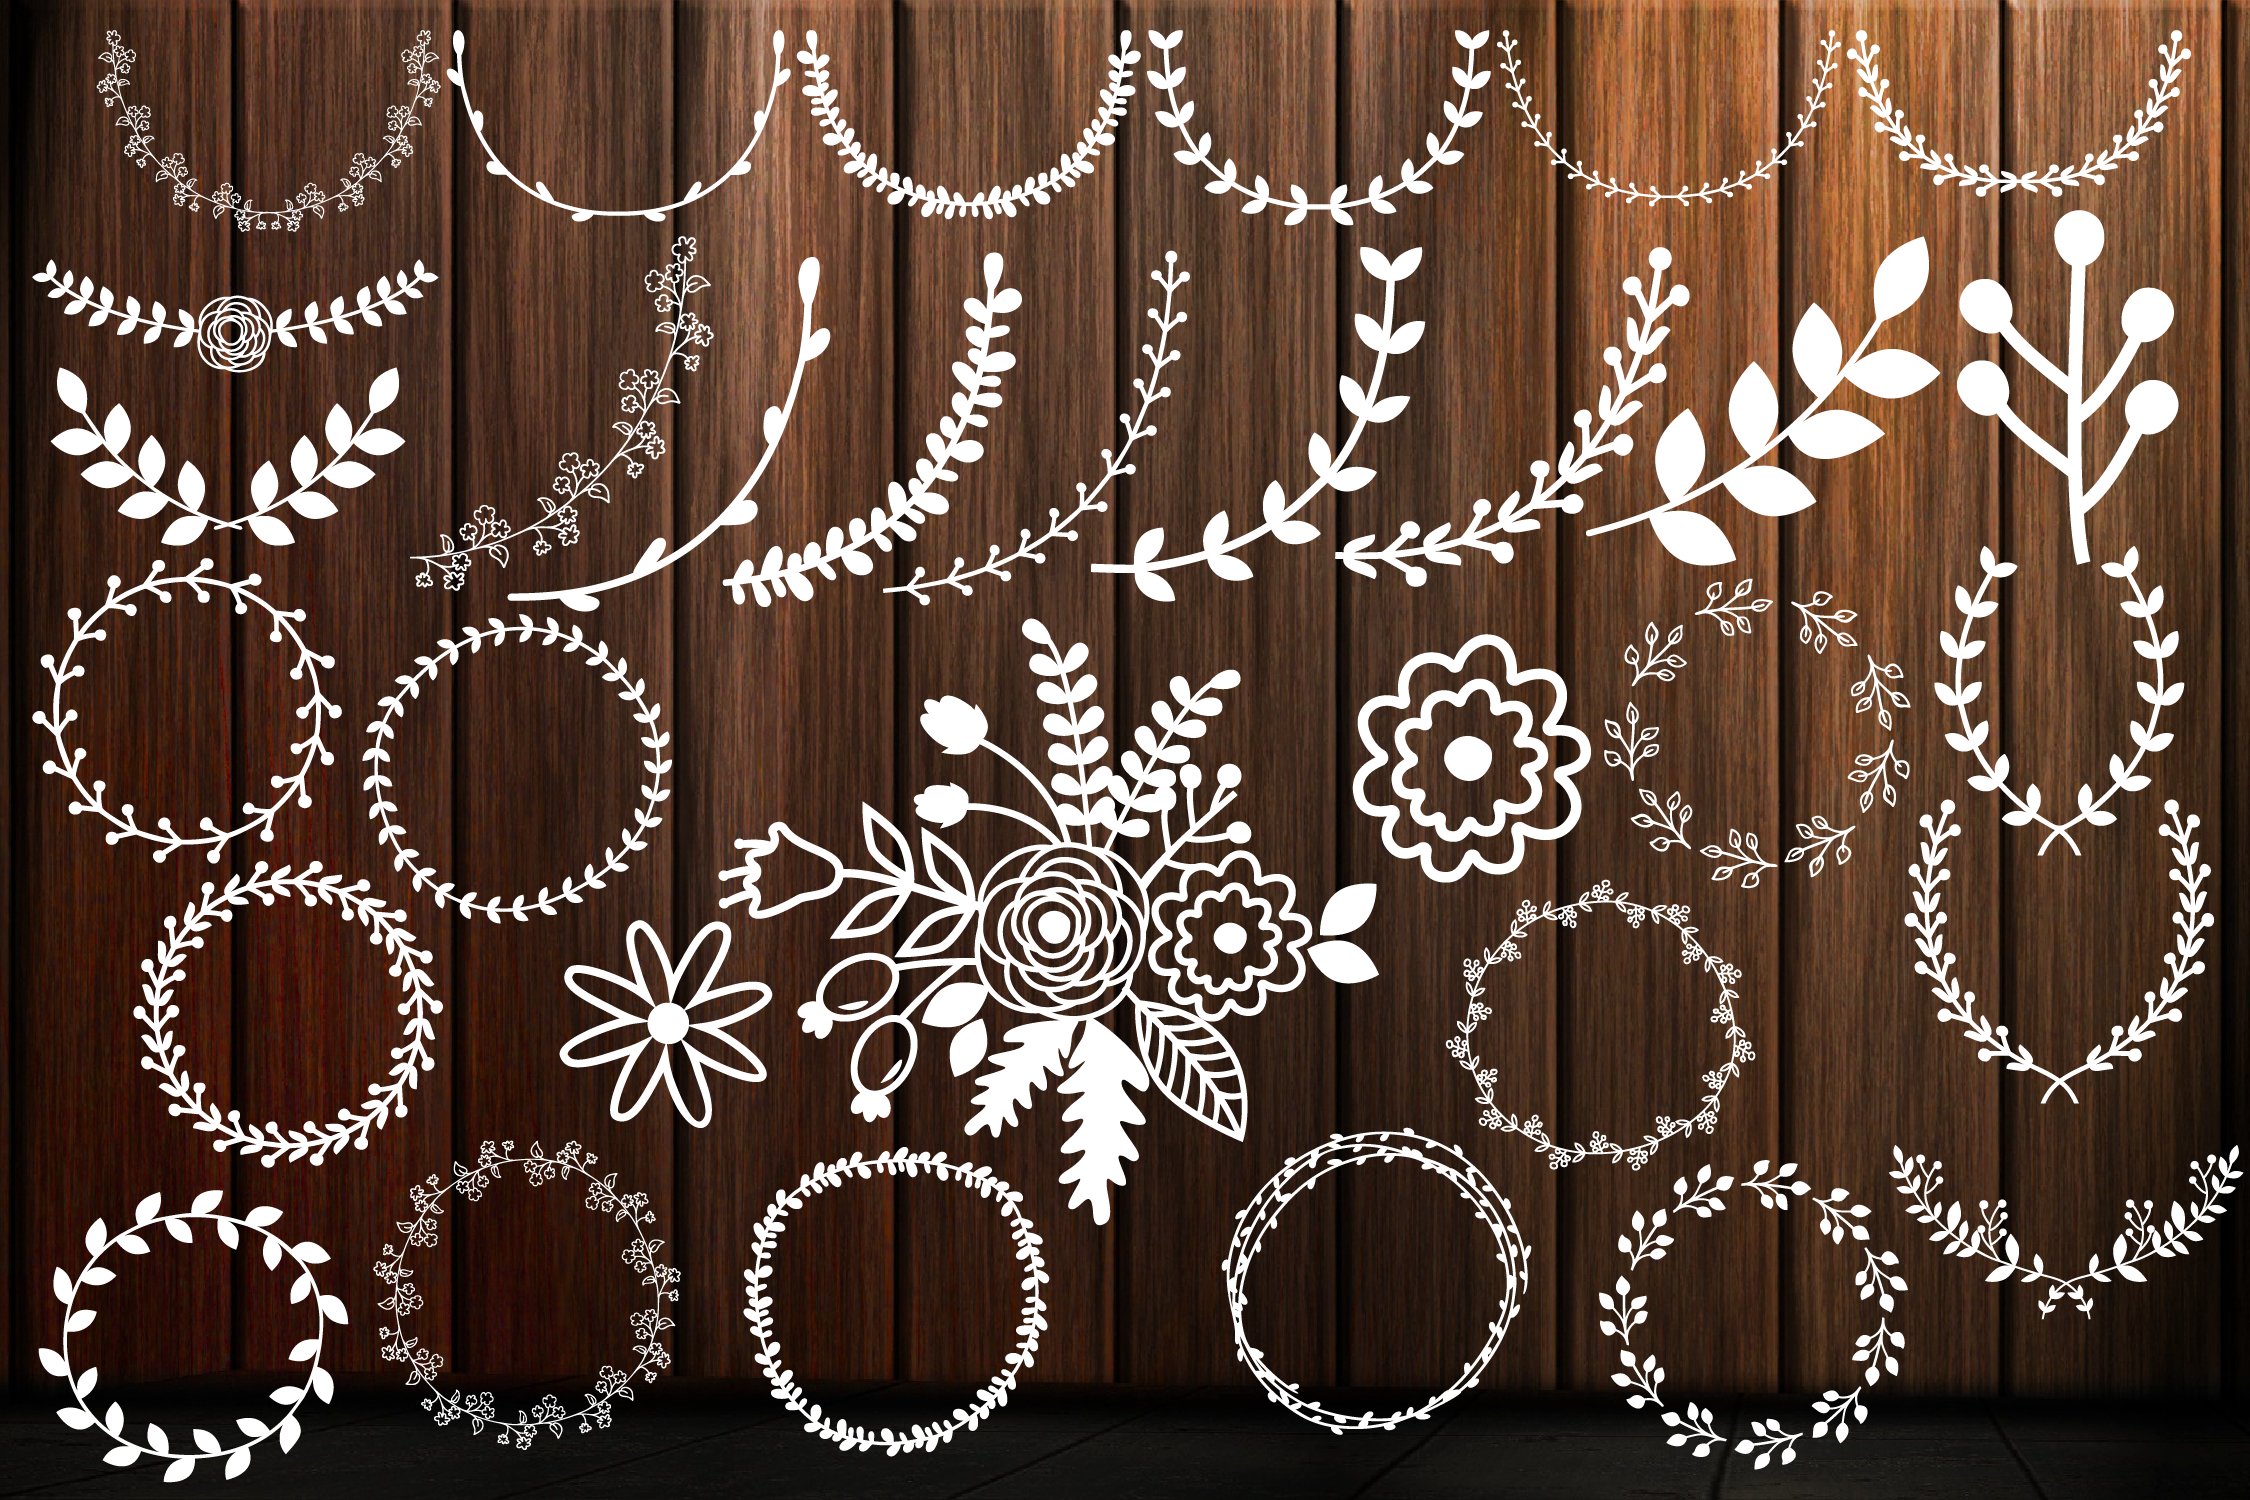 White wreaths on the wooden background.